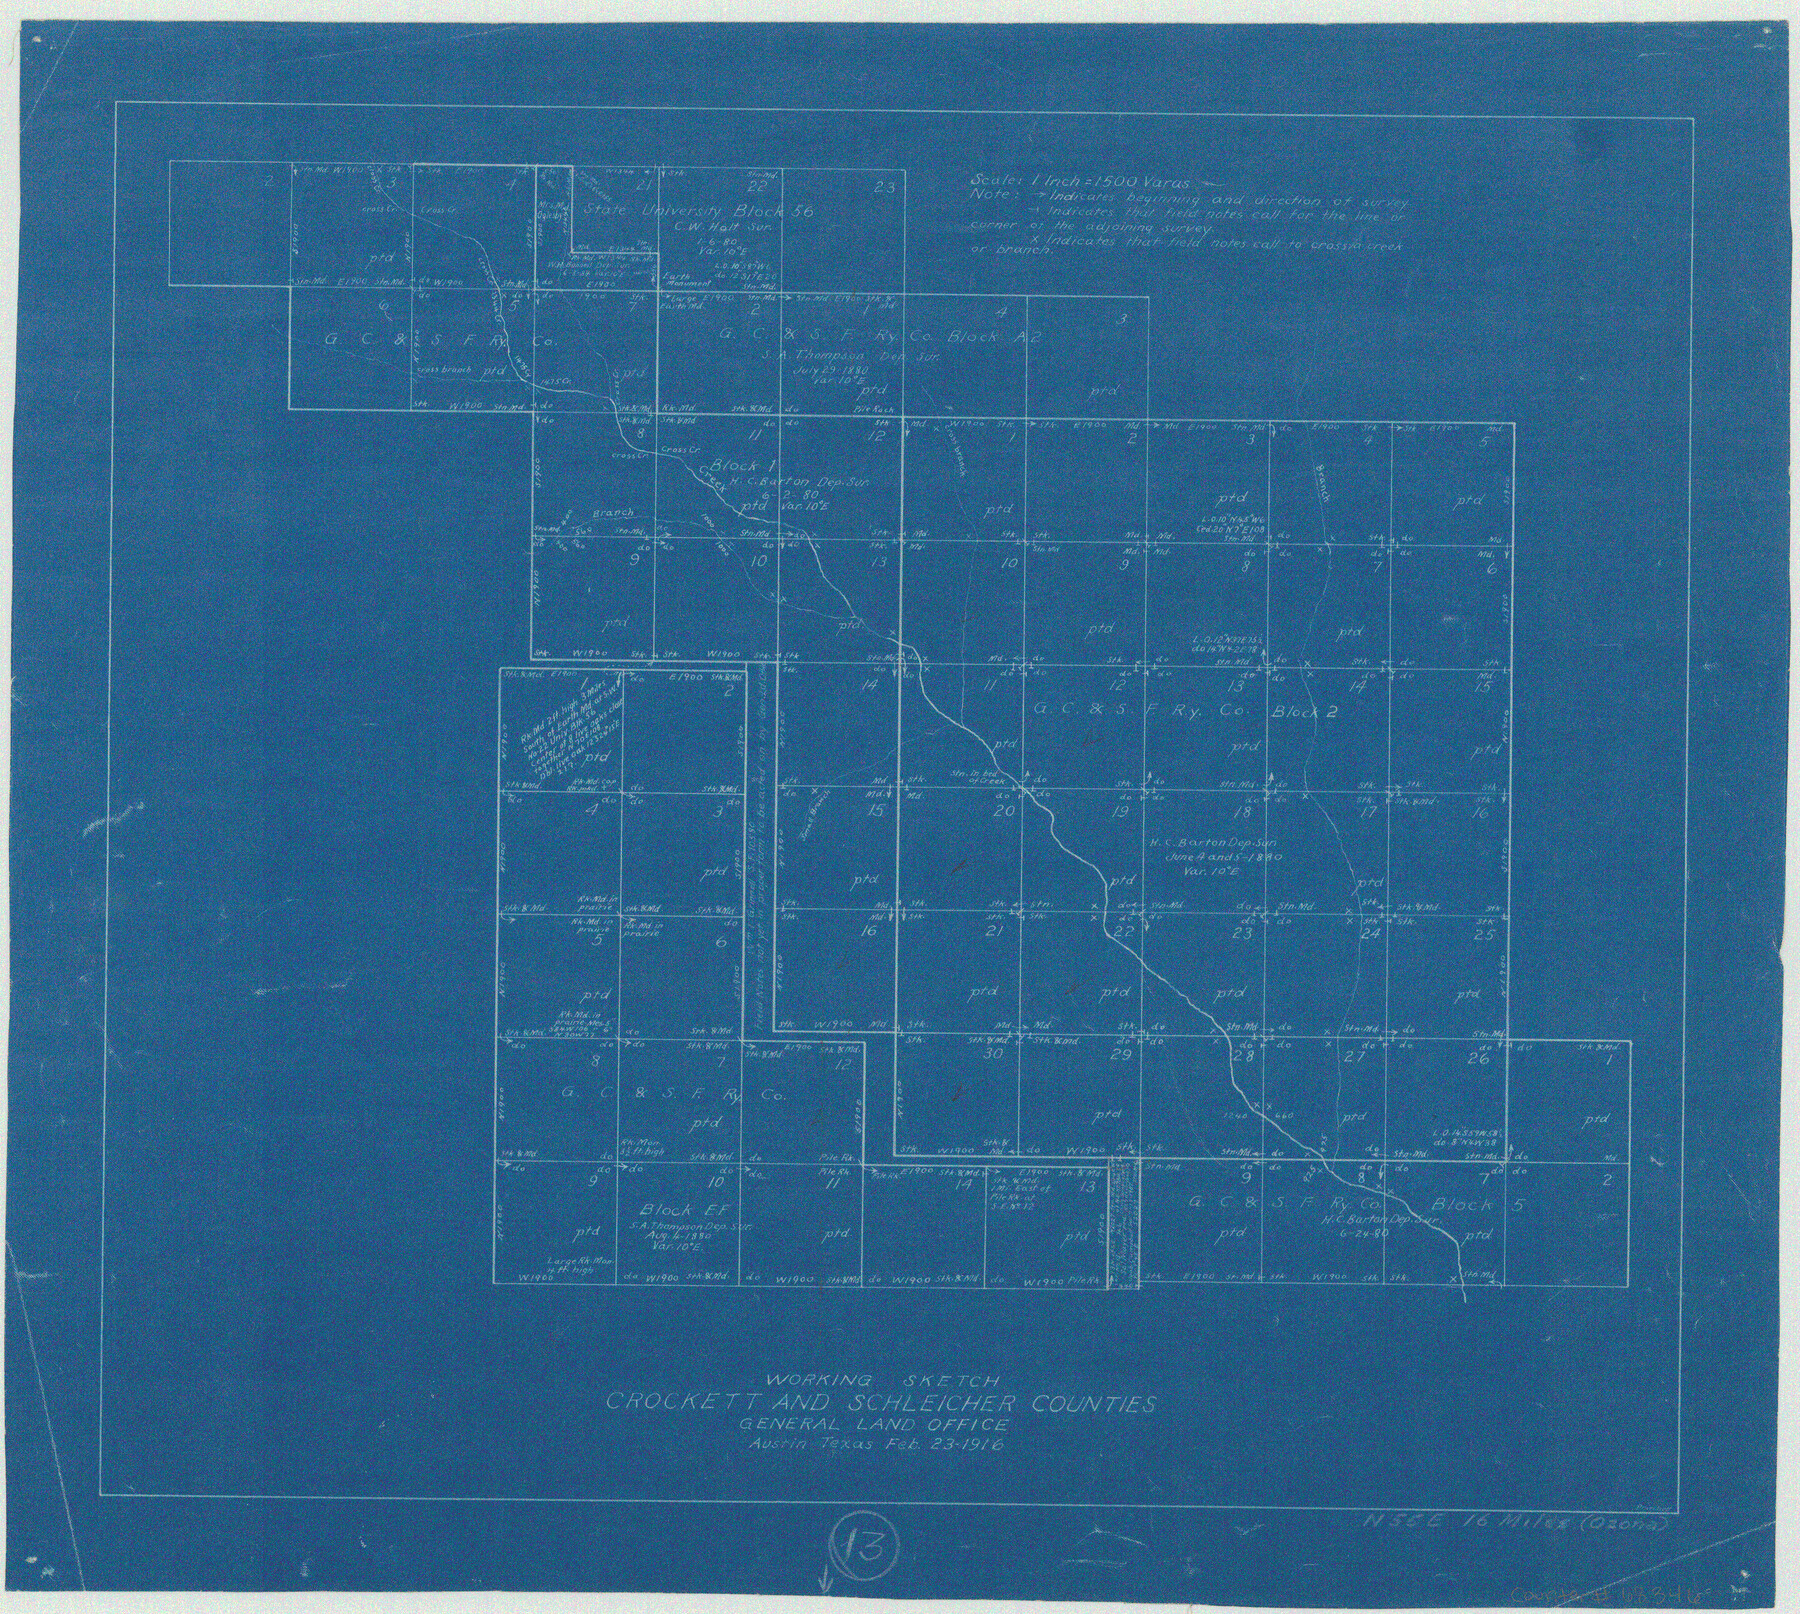 68346, Crockett County Working Sketch 13, General Map Collection